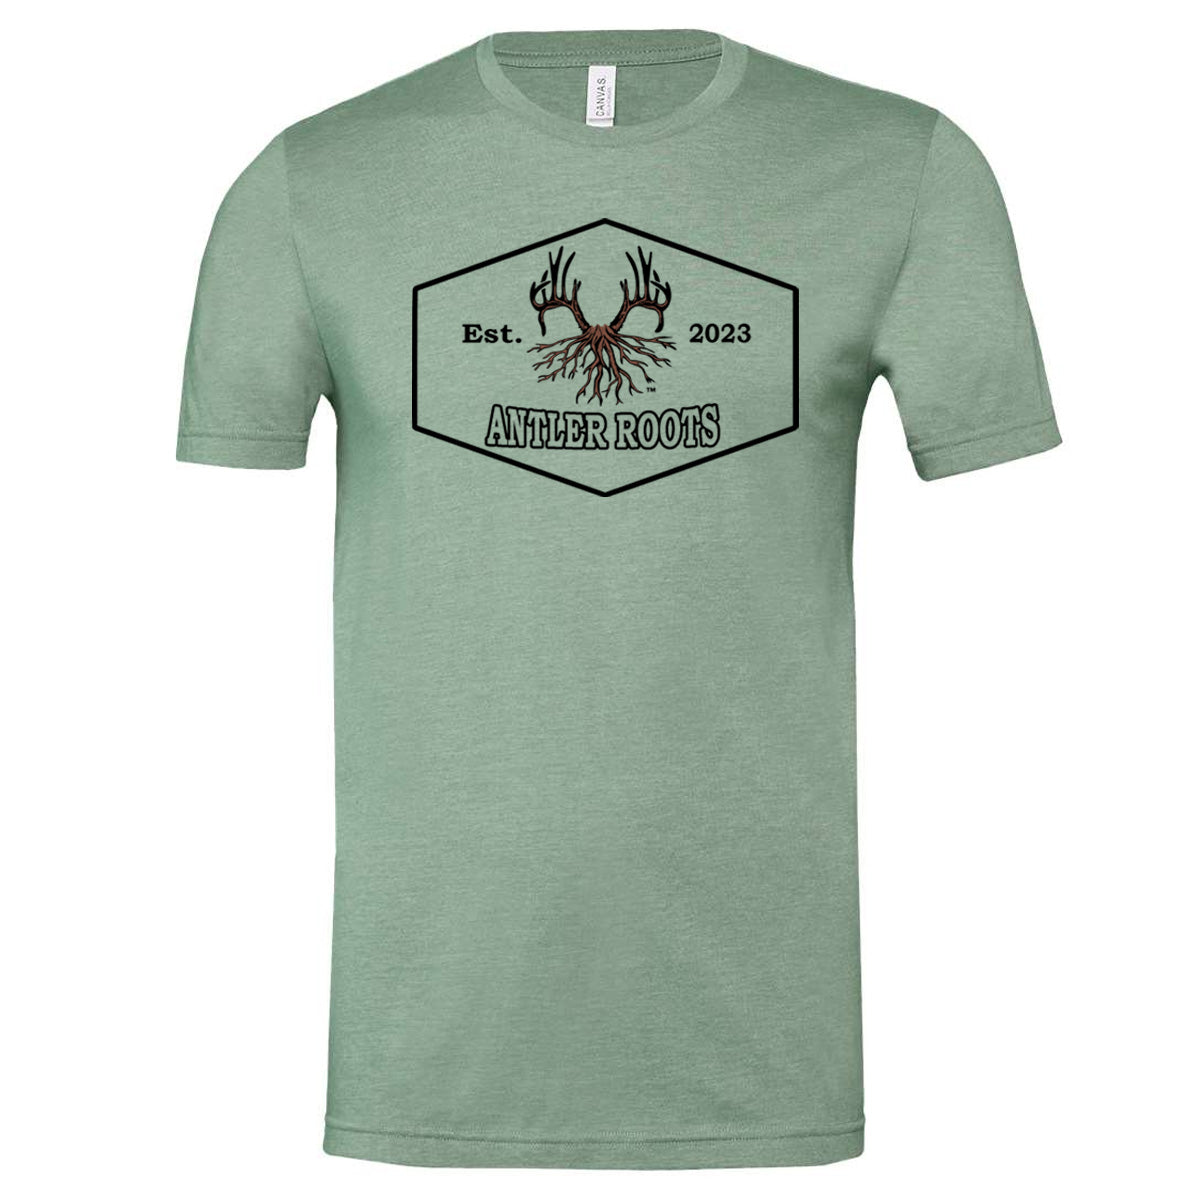 Antler Roots - Diamond Rectangle Est. 2023 - Heathered Dusty Sage (Tee/Hoodie) - Southern Grace Creations